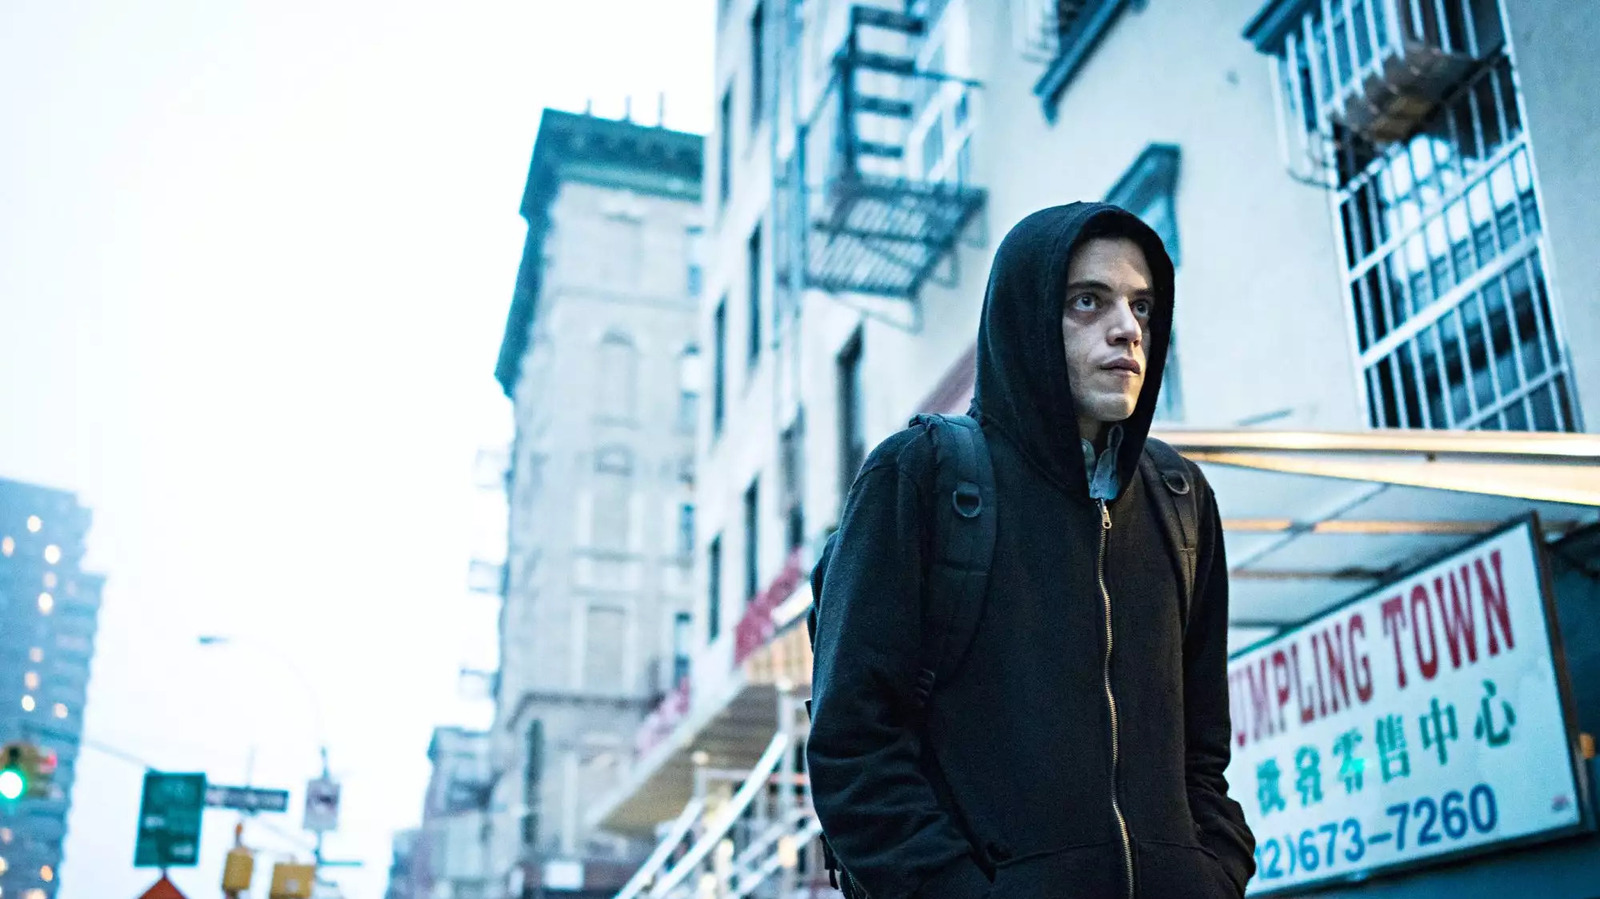 Take Me Home: Why “Mr. Robot” Matters, TV/Streaming